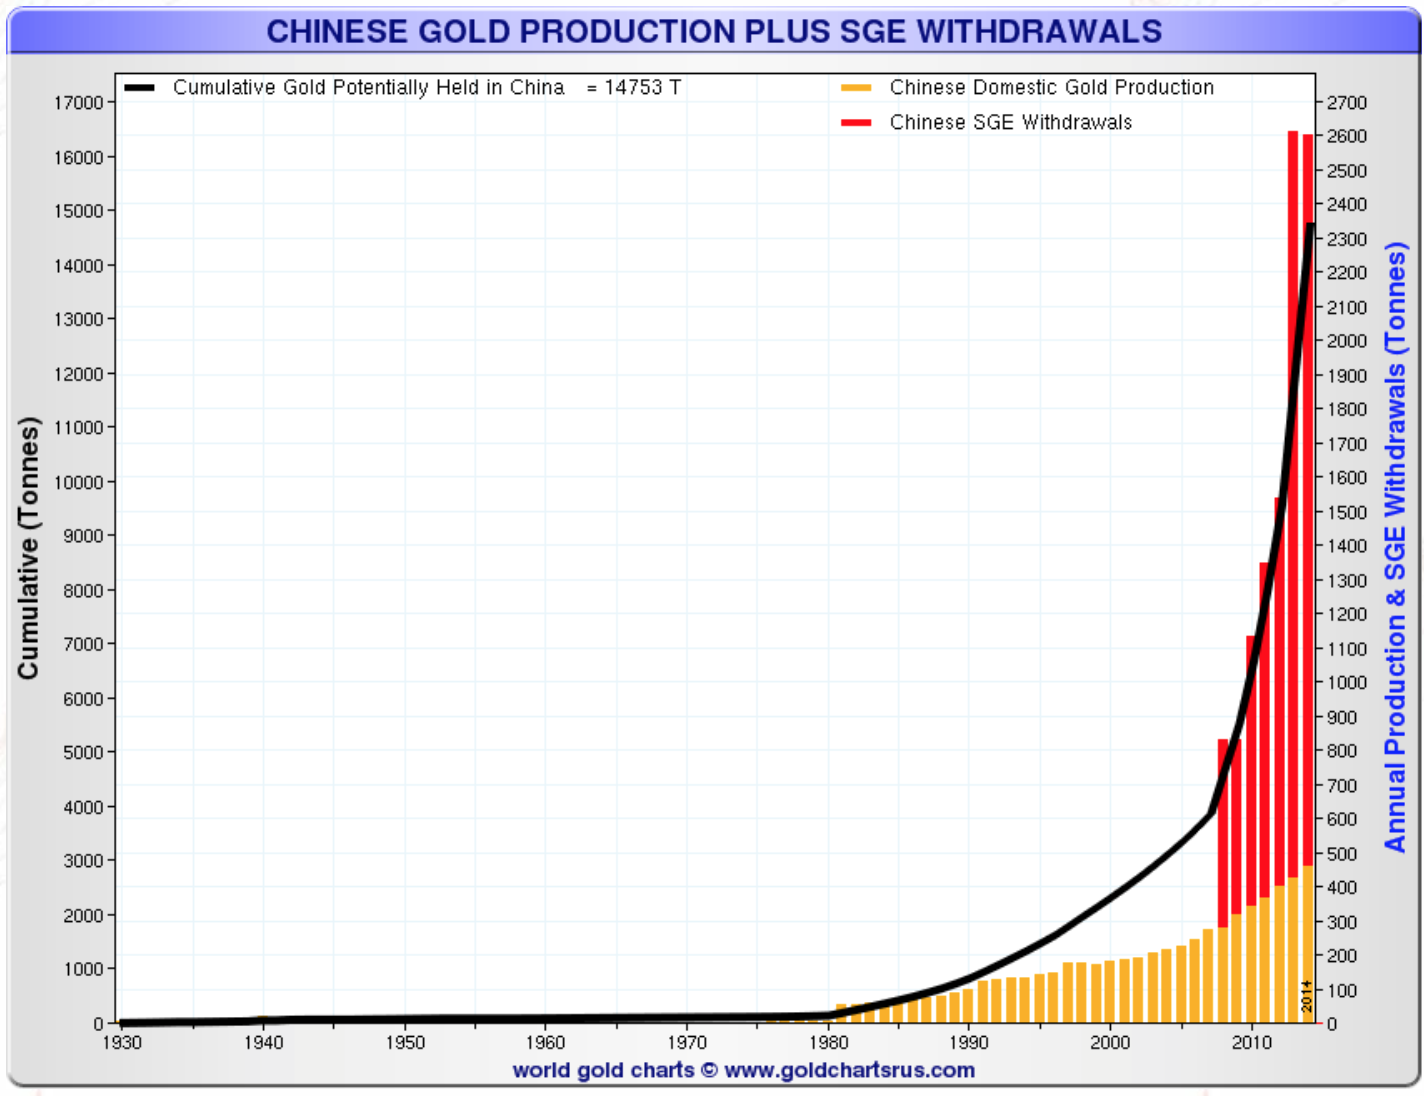 Chinese gold production plus SGE withdrawals